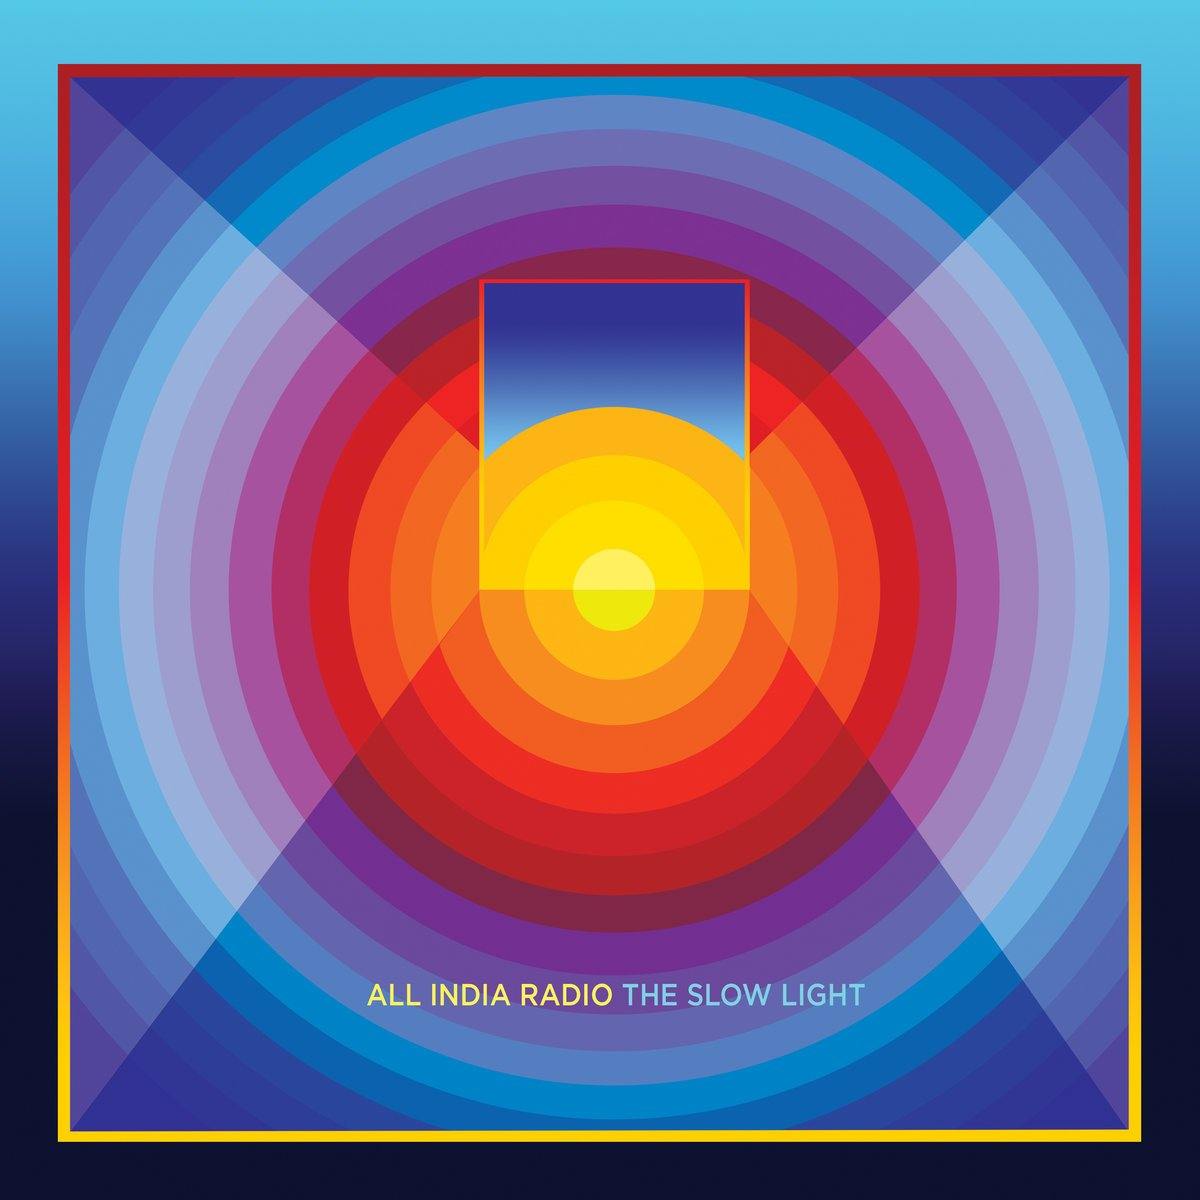 All India Radio - The Slow Light - Behind The Sky Music